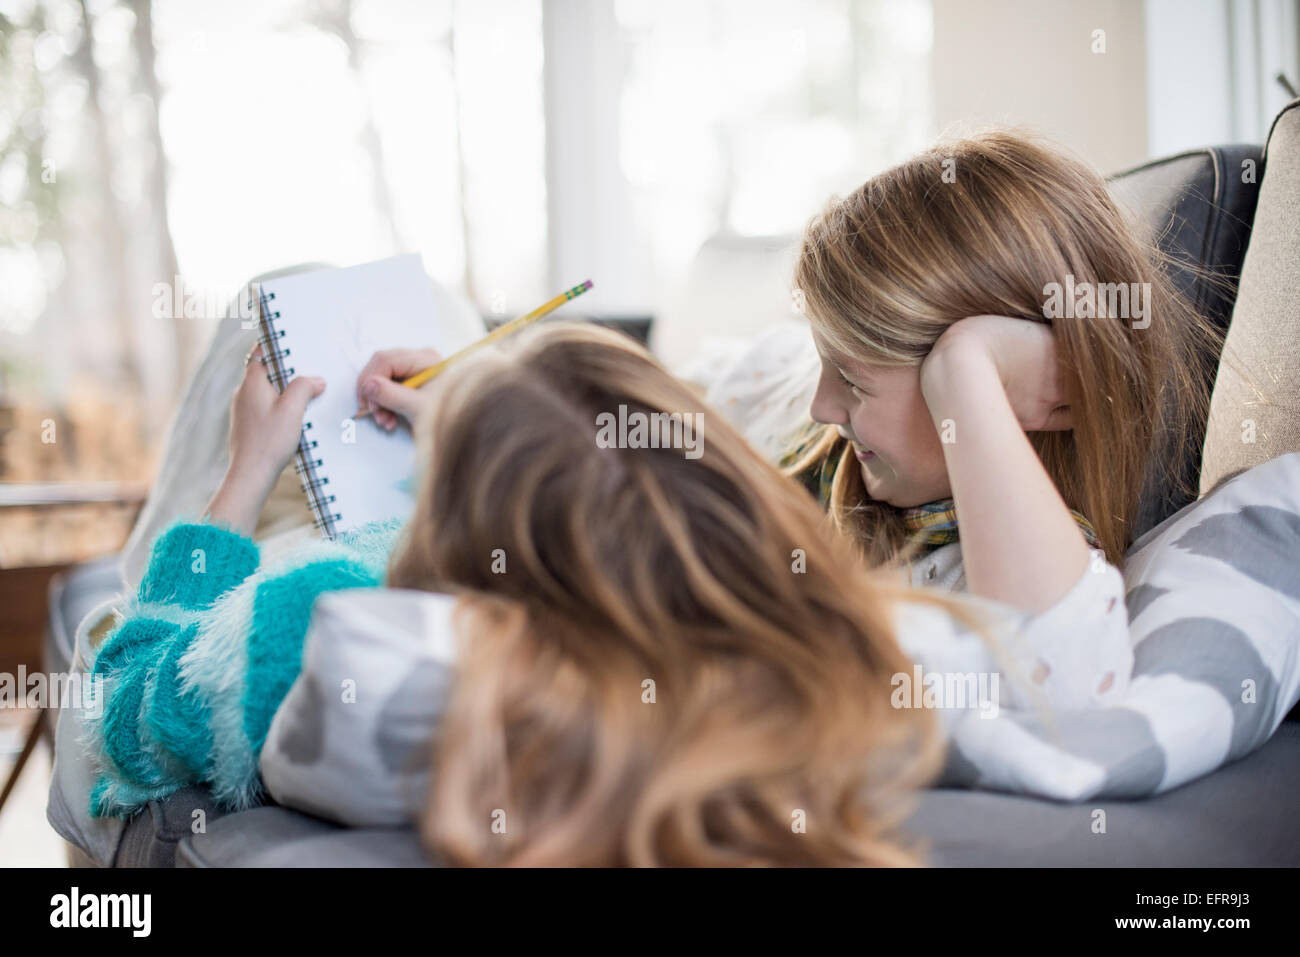 Two girls lying on a sofa, one writing into a notebook with a pencil. Stock Photo